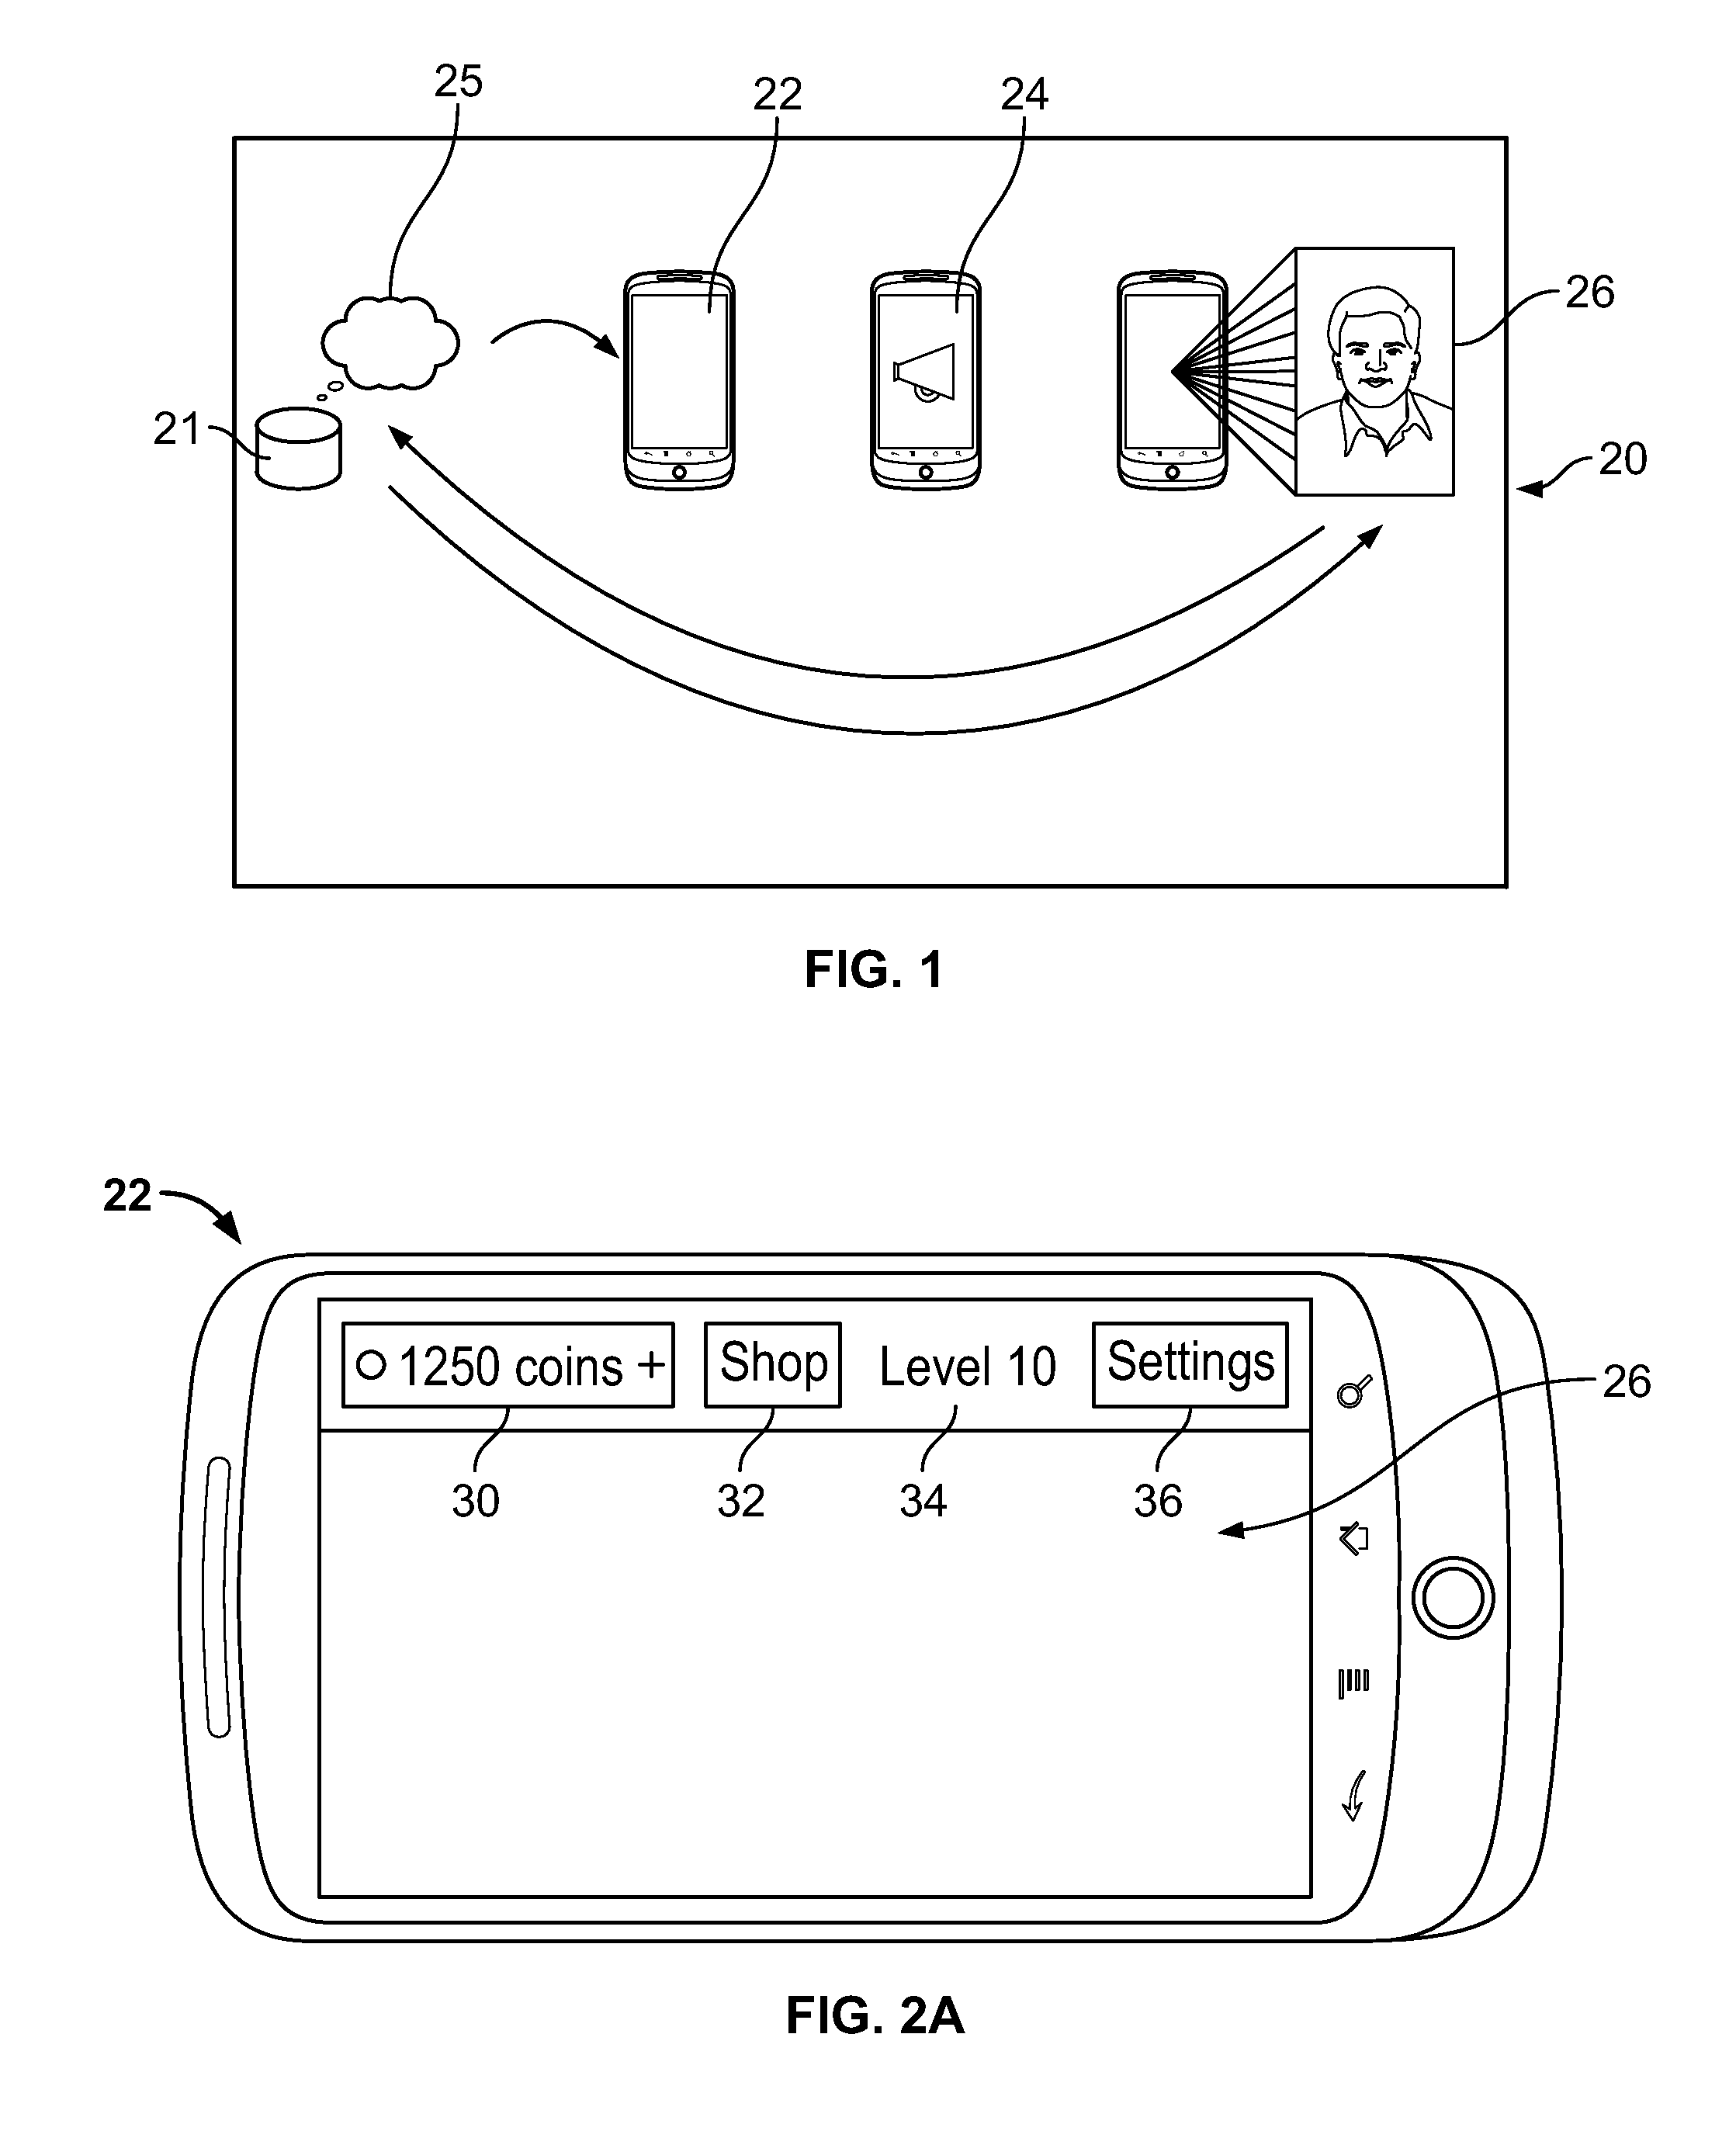 System and method for providing virtual world reward in response to the user accepting and/or responding to an advertisement for a real world product received in the virtual world